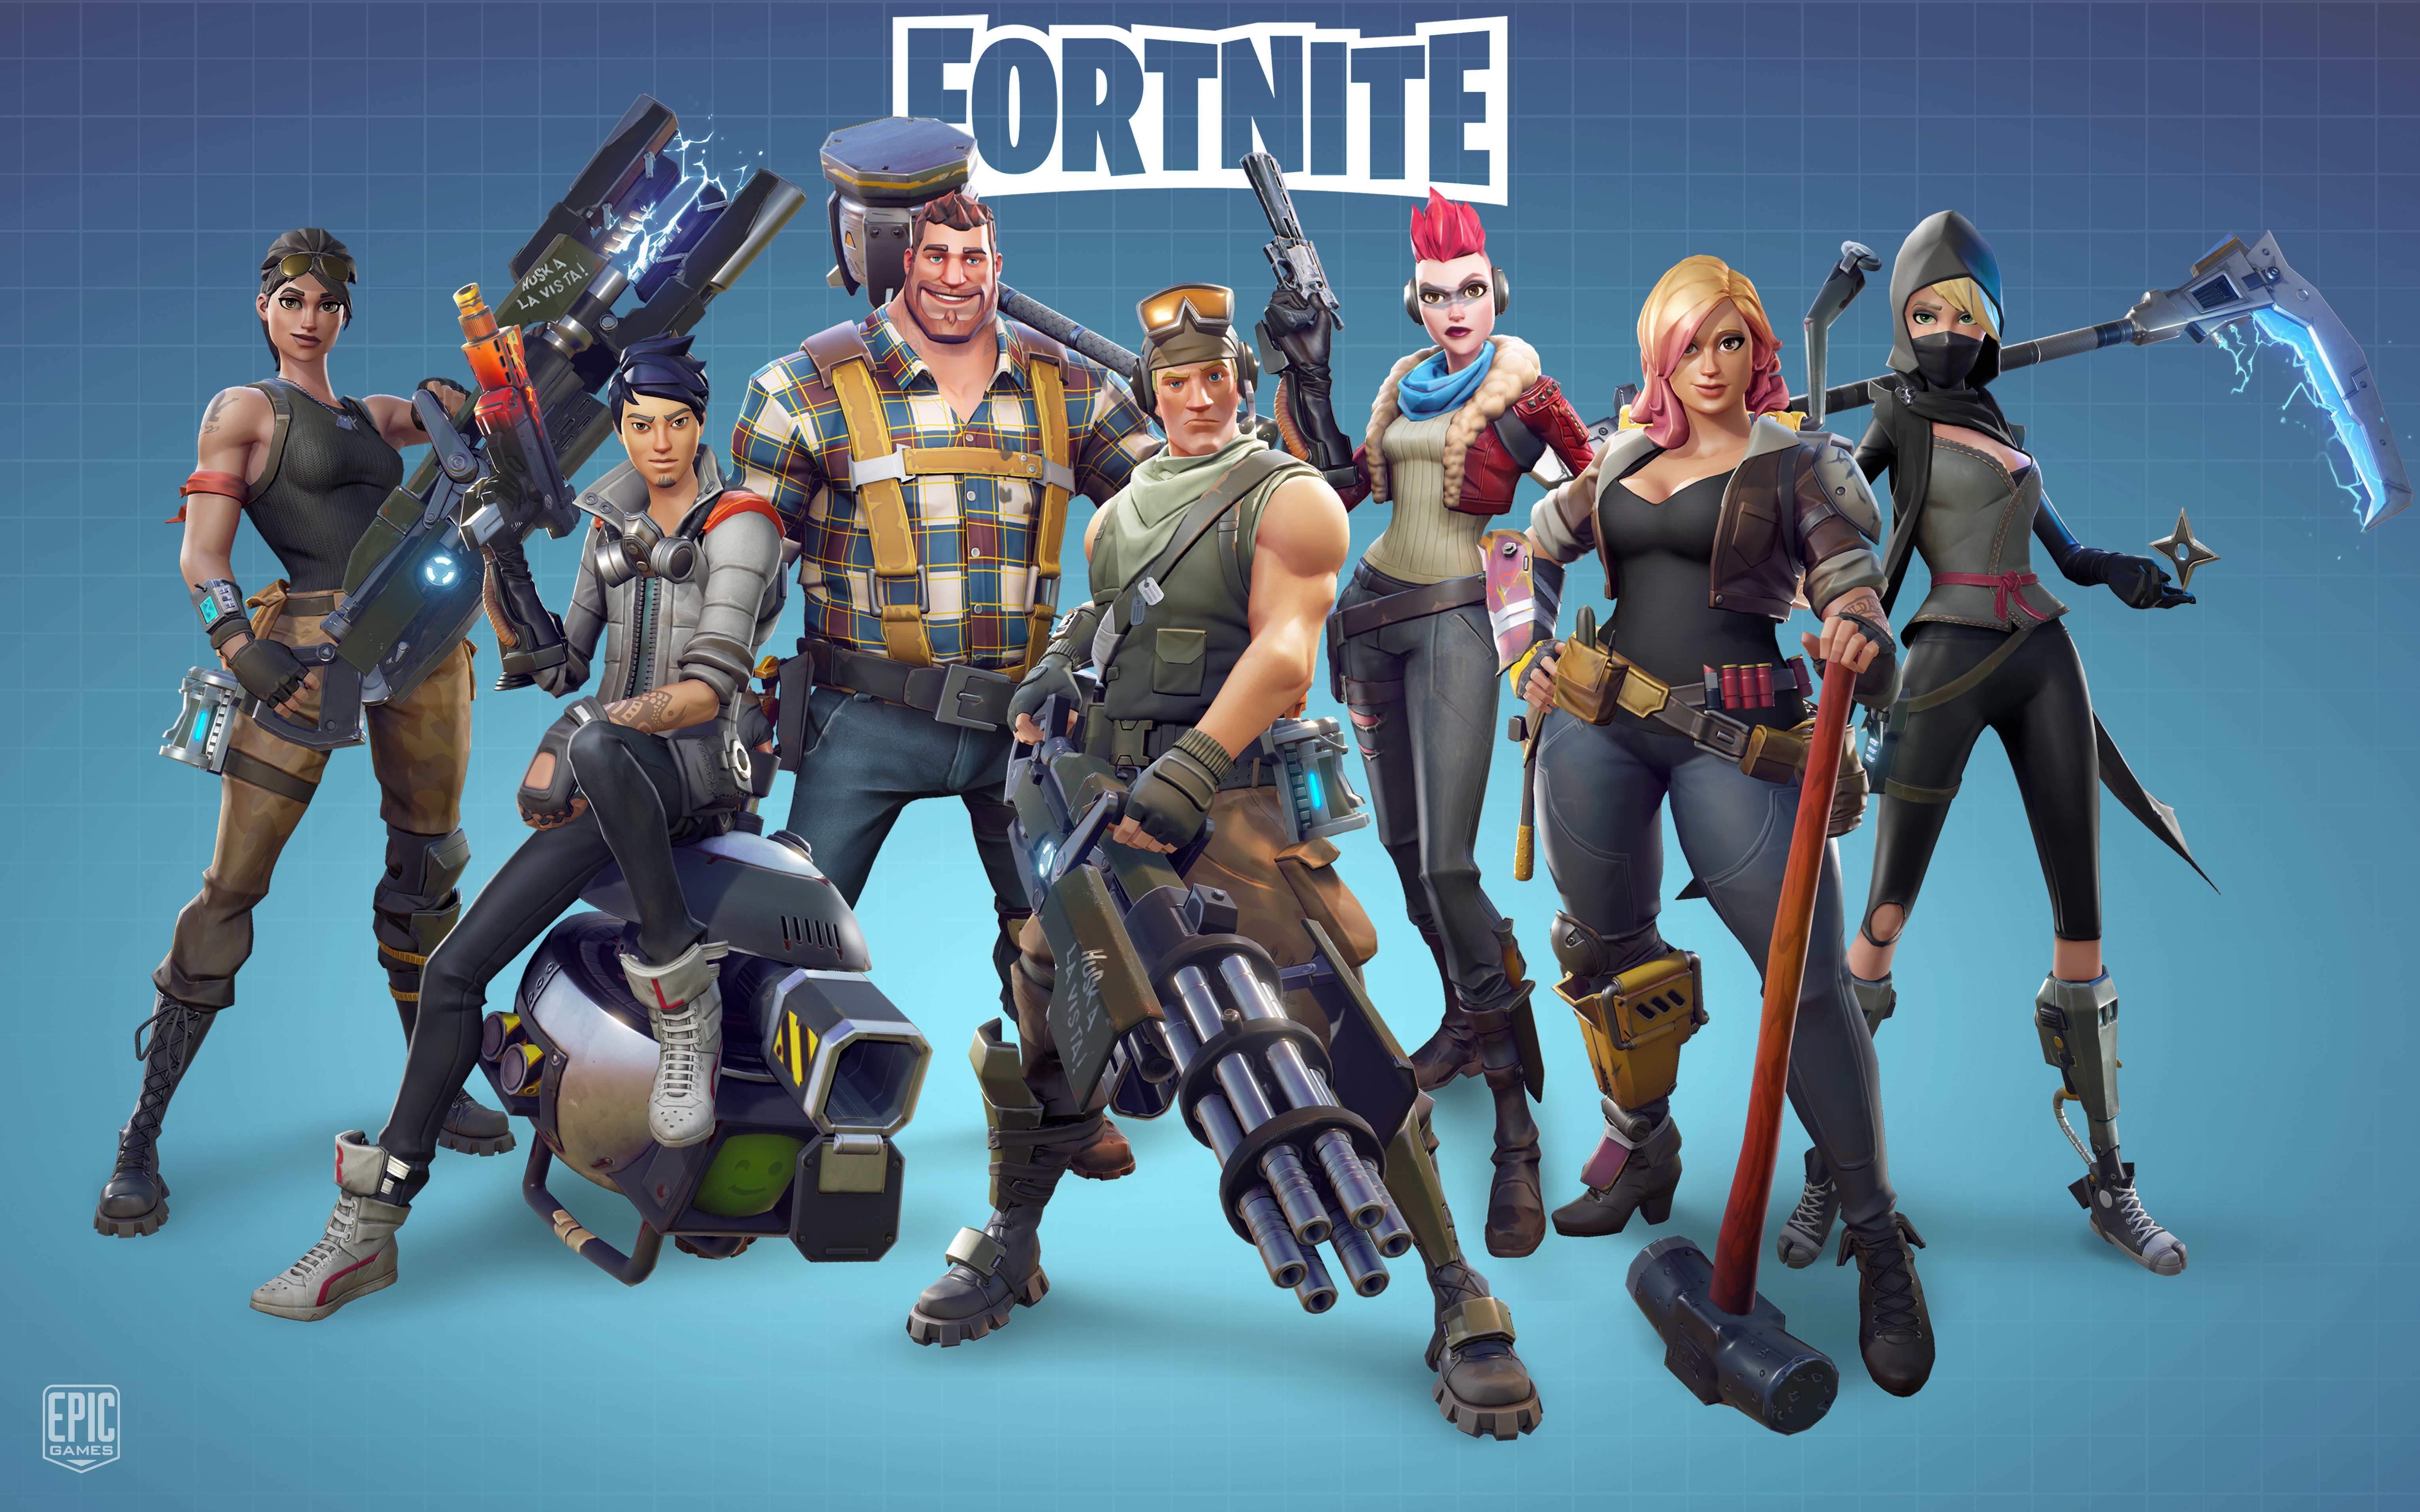 Male Pictures Of Fortnite Characters Despite Inclusive Design Fortnite Gamers Victim To Gendered Harassment News Northeastern